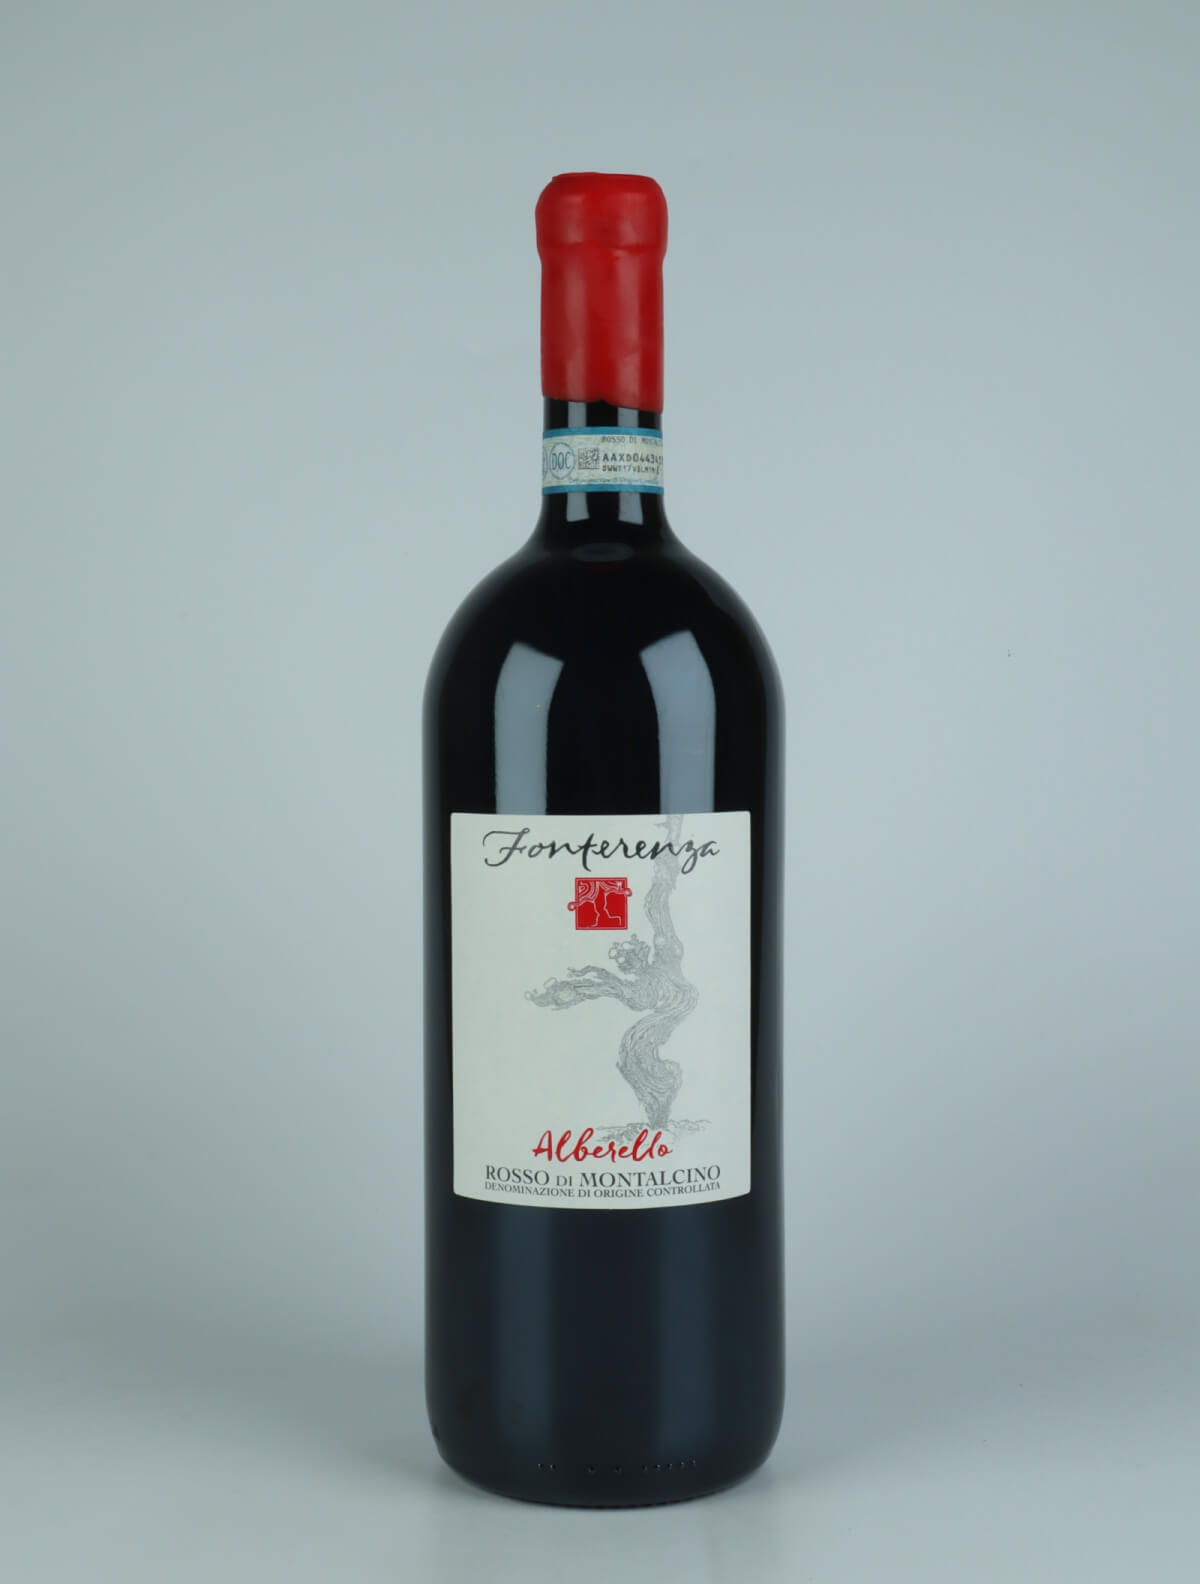 A bottle 2018 Rosso di Montalcino - Alberello Red wine from Fonterenza, Tuscany in Italy